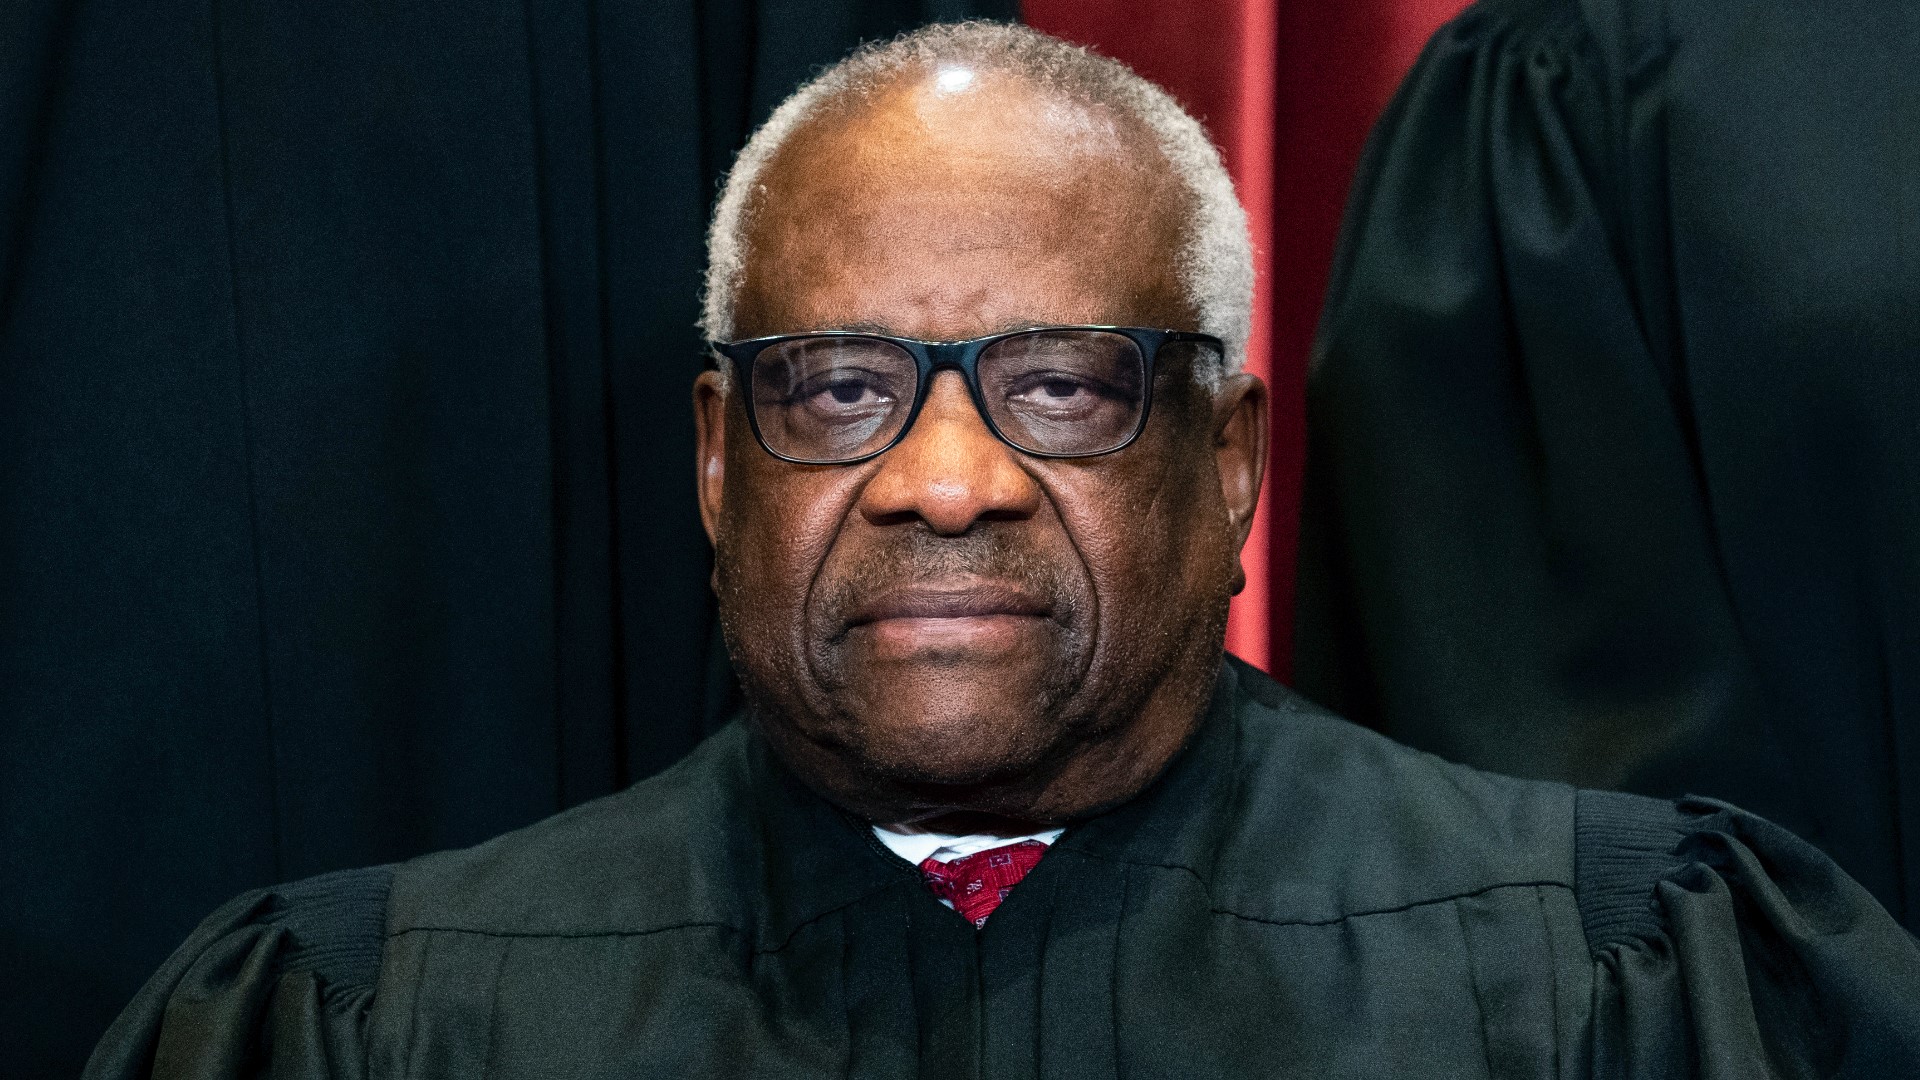 In his concurring opinion, Justice Clarence Thomas said the court should review other precedents including its 2015 decision legalizing same-sex marriage.